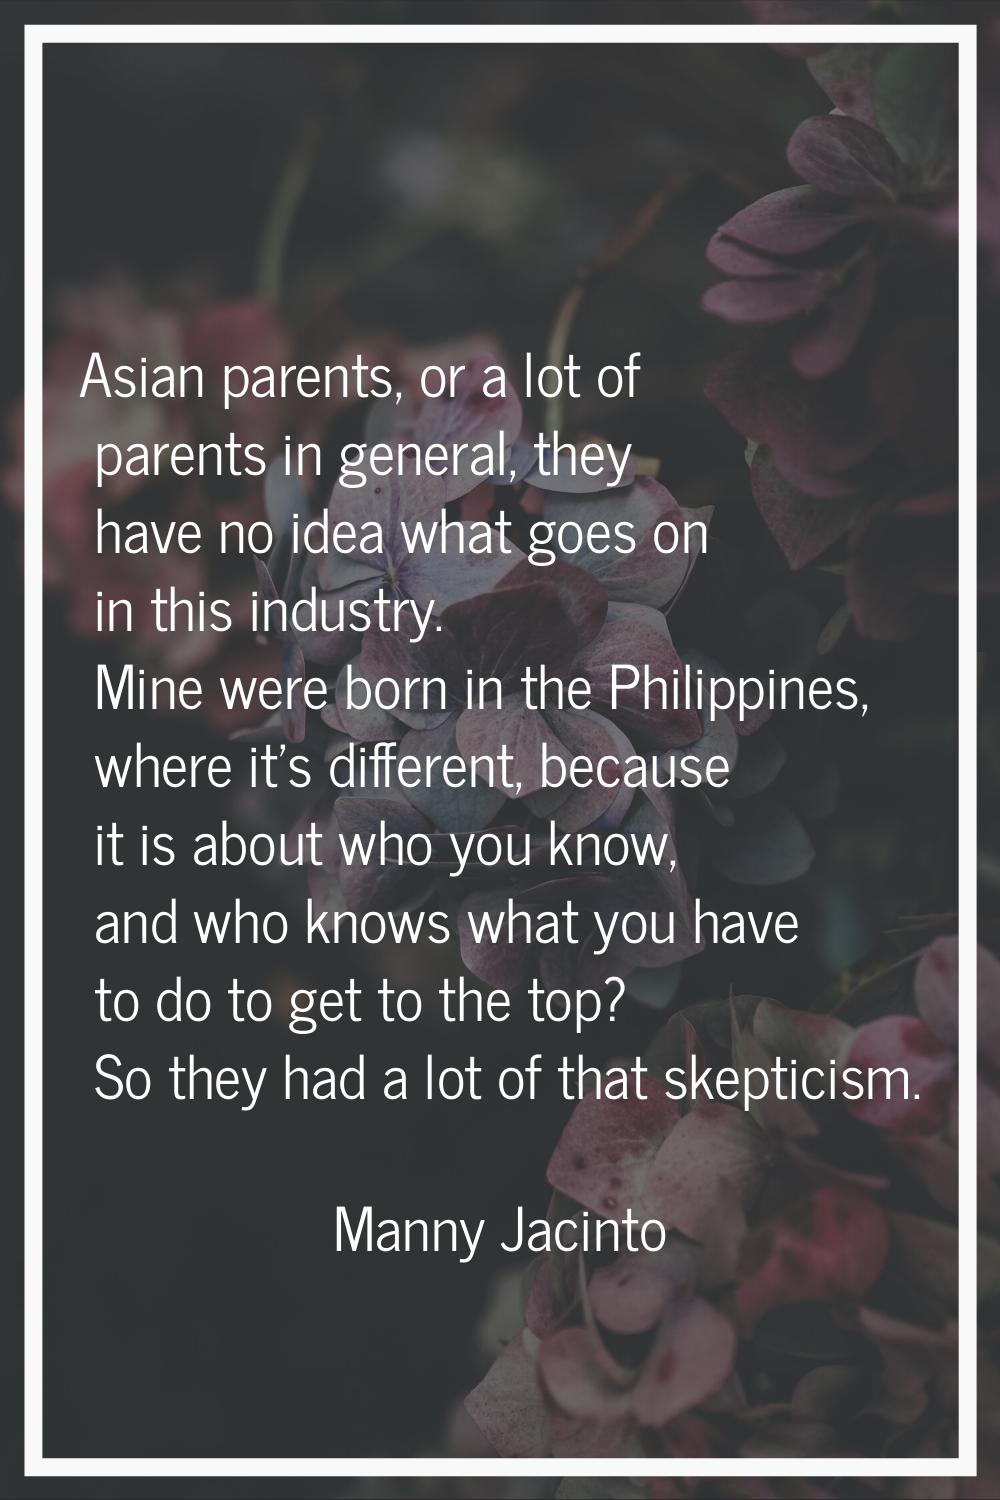 Asian parents, or a lot of parents in general, they have no idea what goes on in this industry. Min